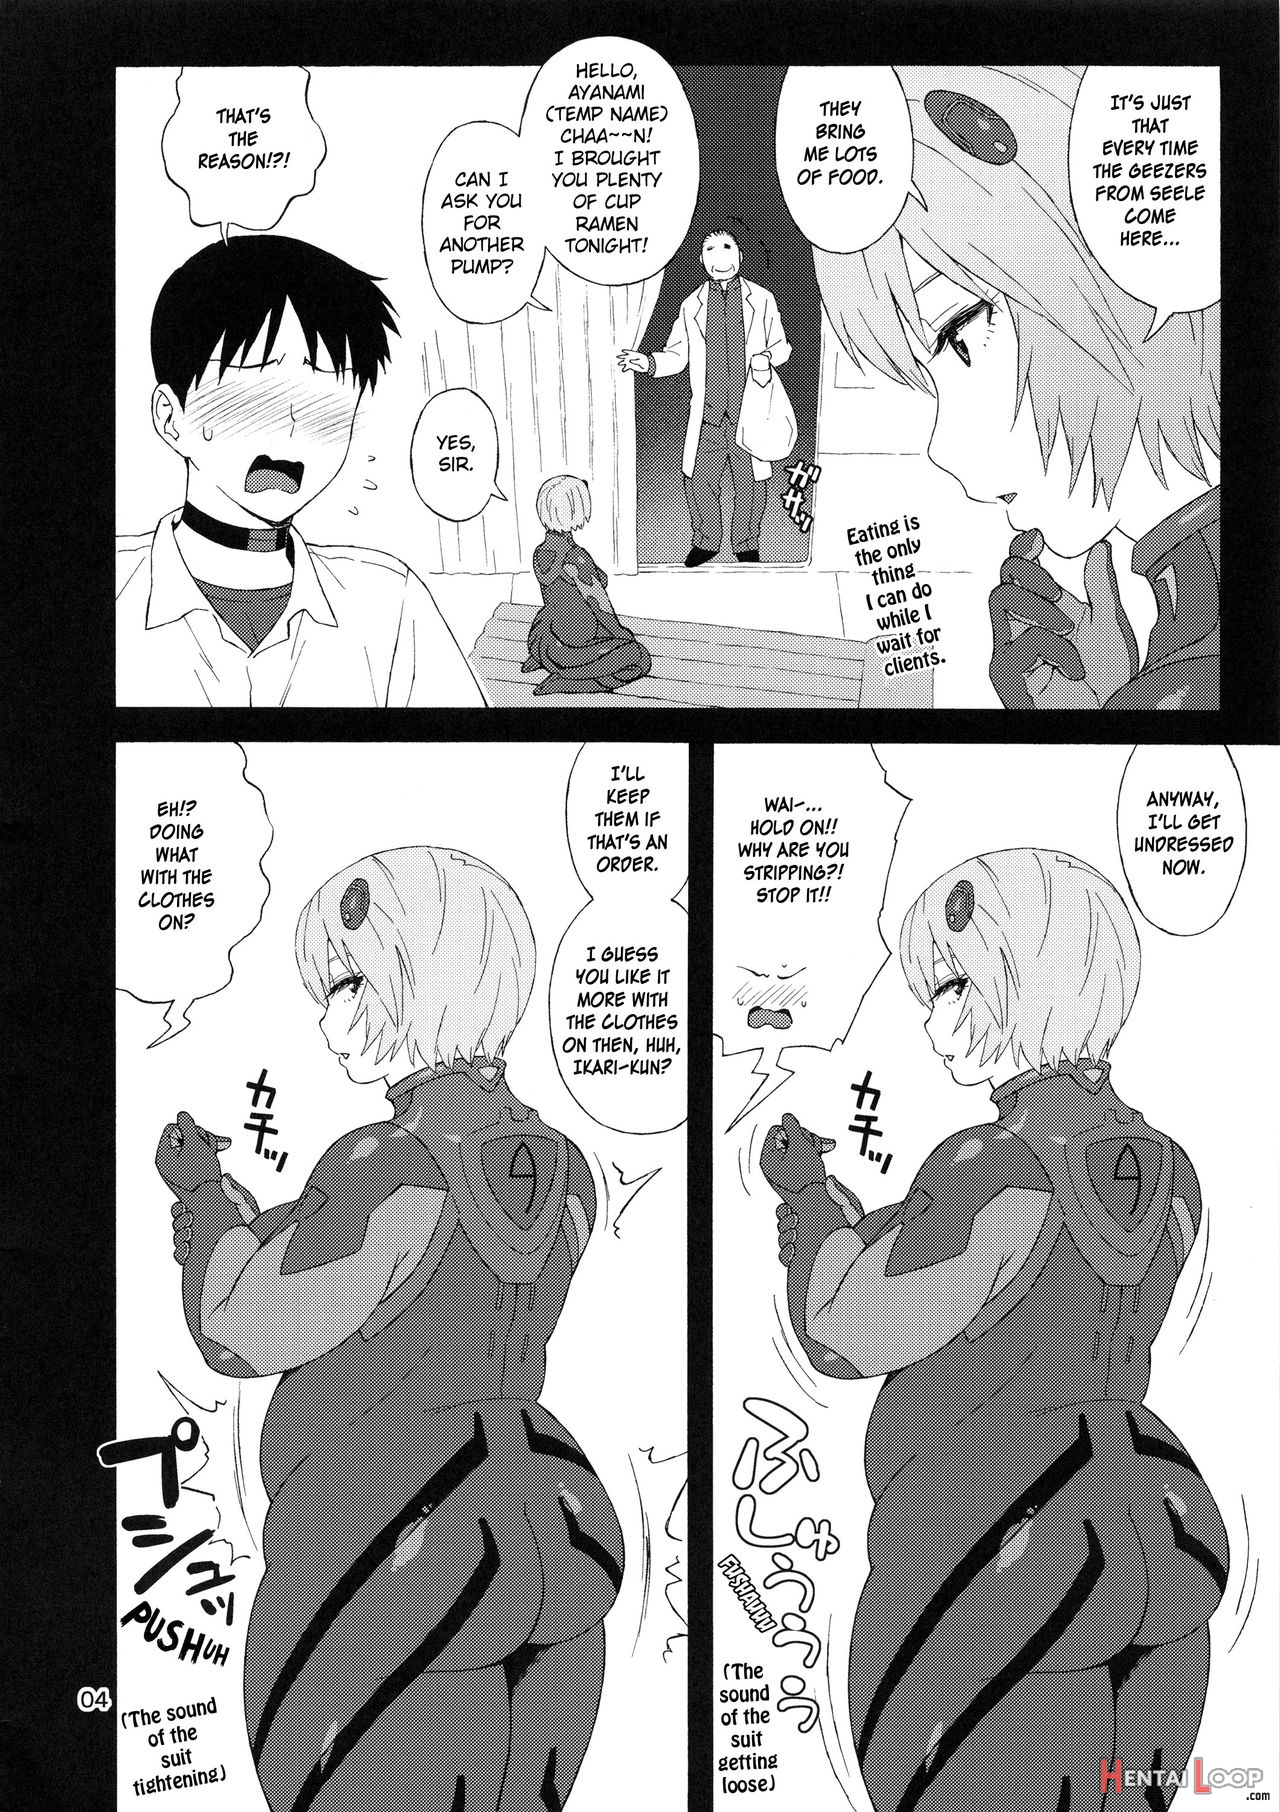 My Ayanami Can't Be This Fat! page 4